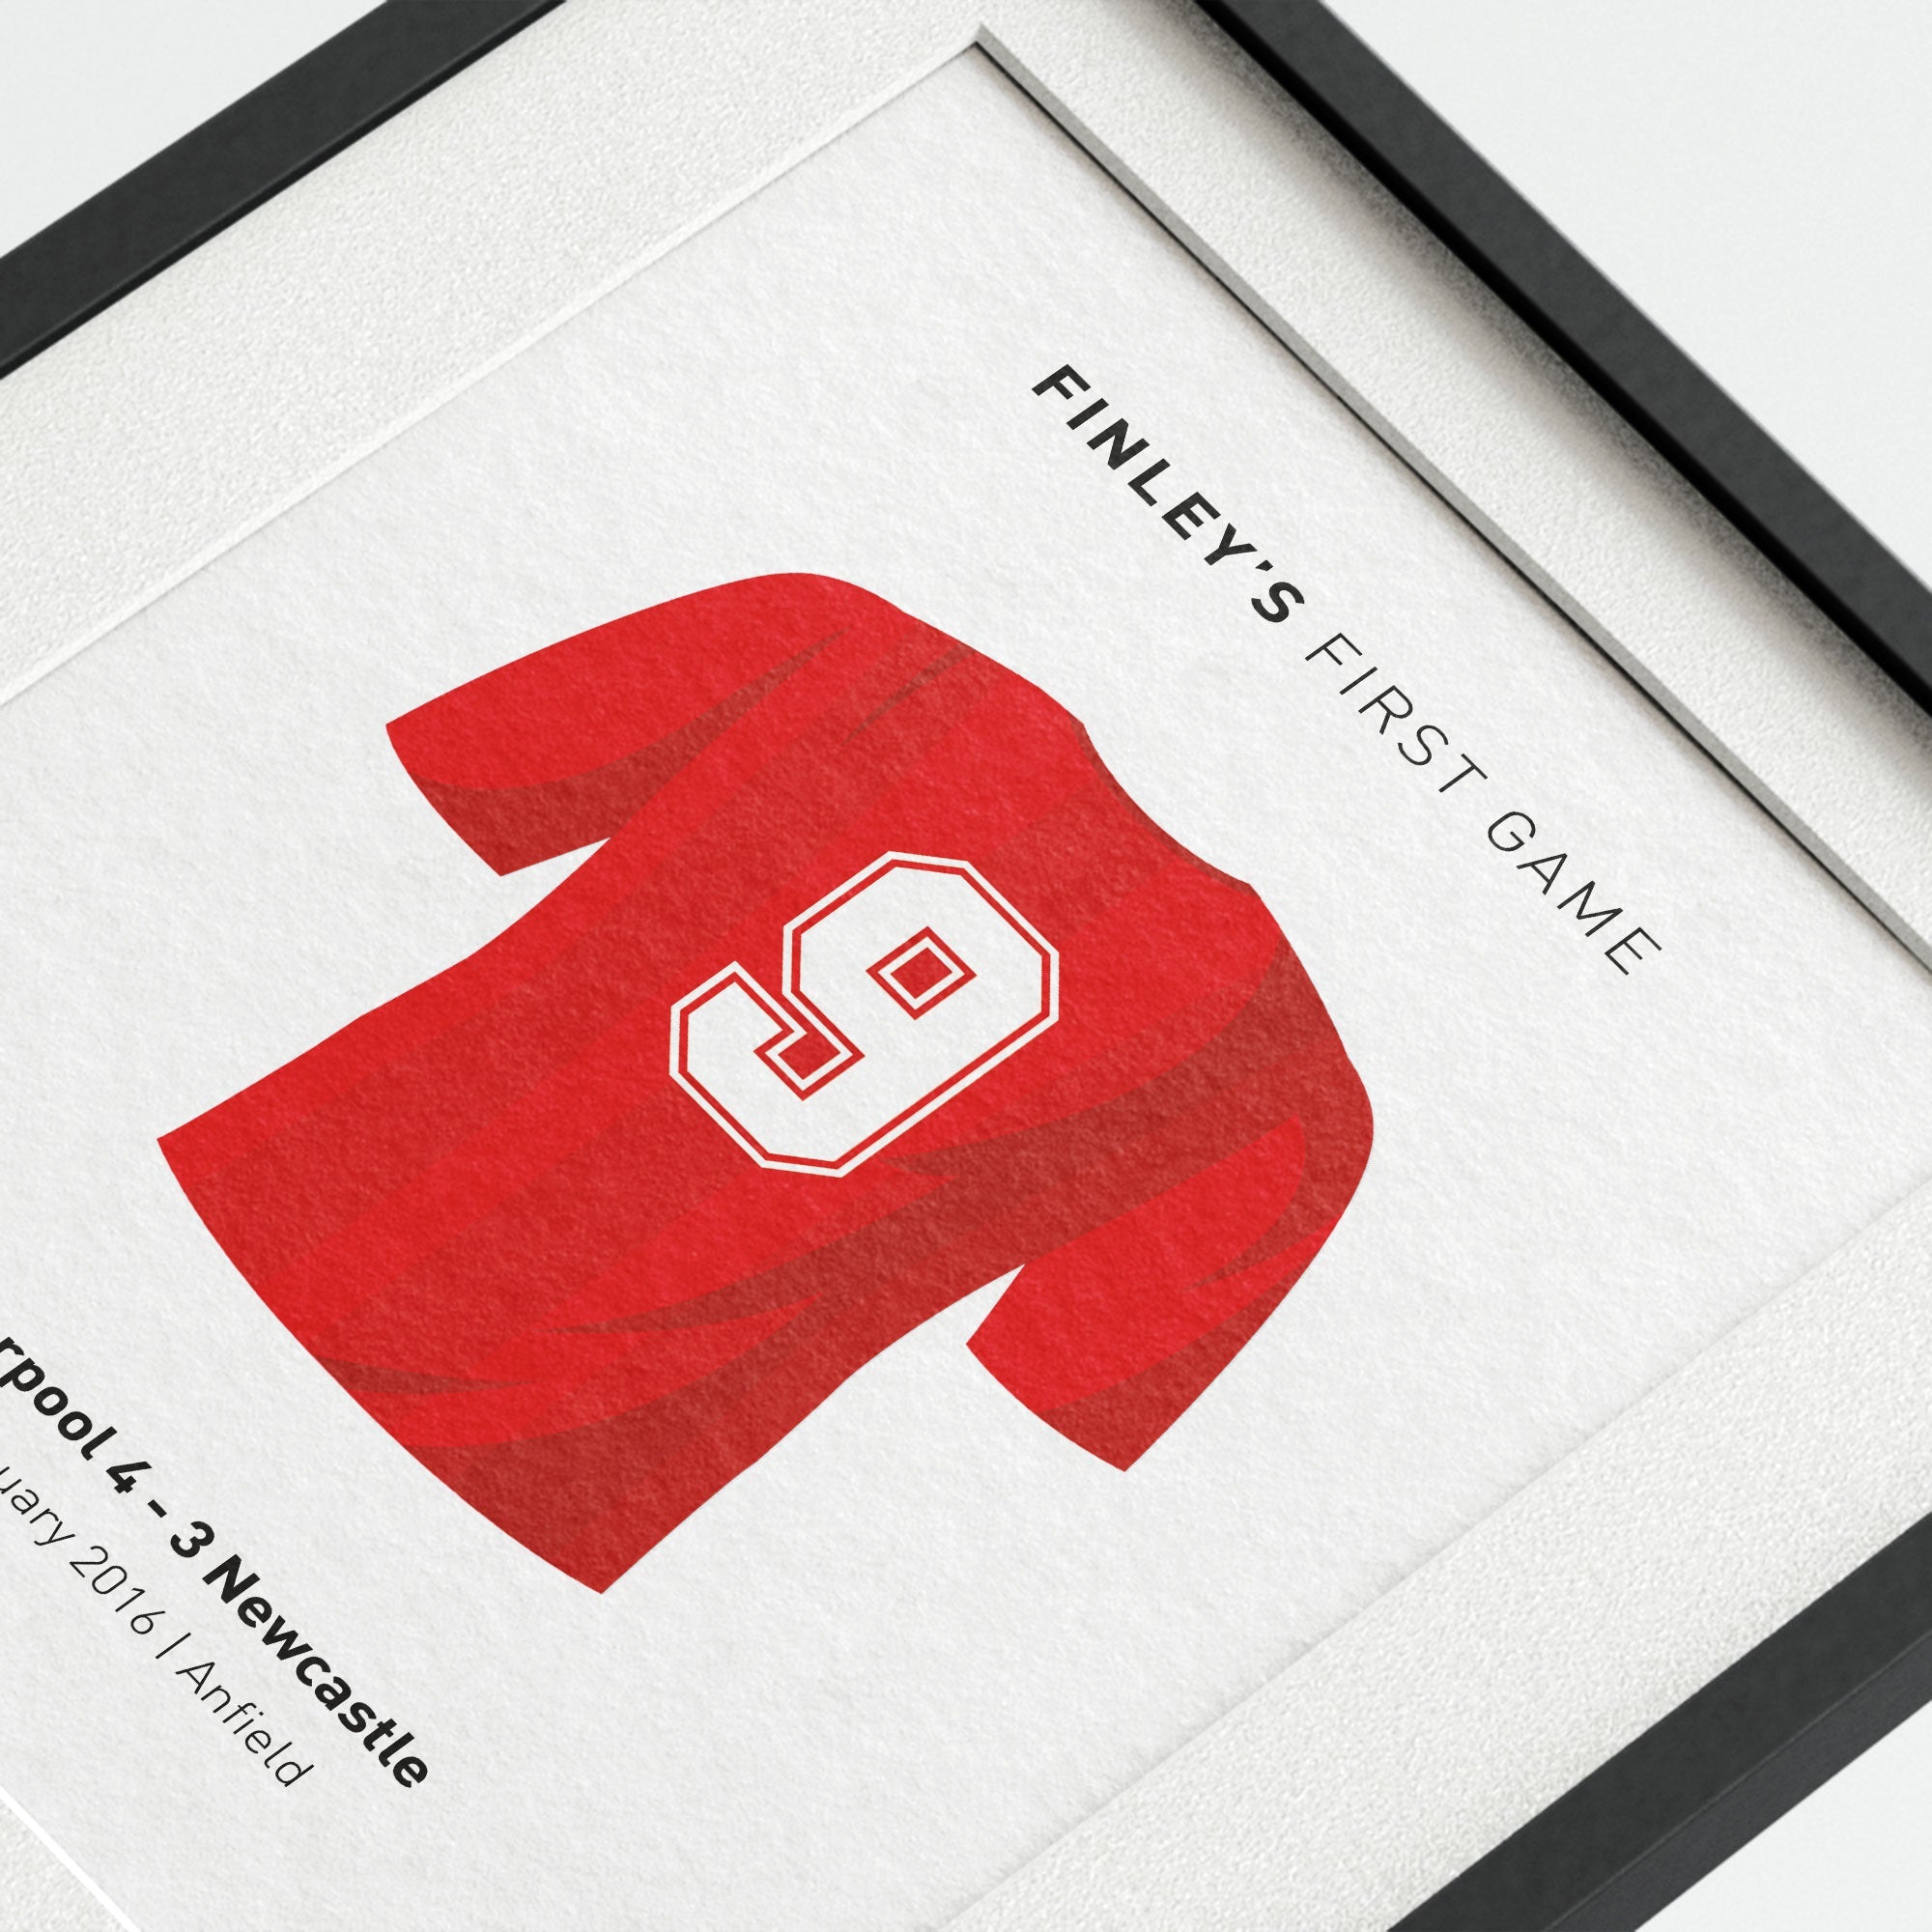 PERSONALISED 'My First Game' Sports Print Good Team On Paper